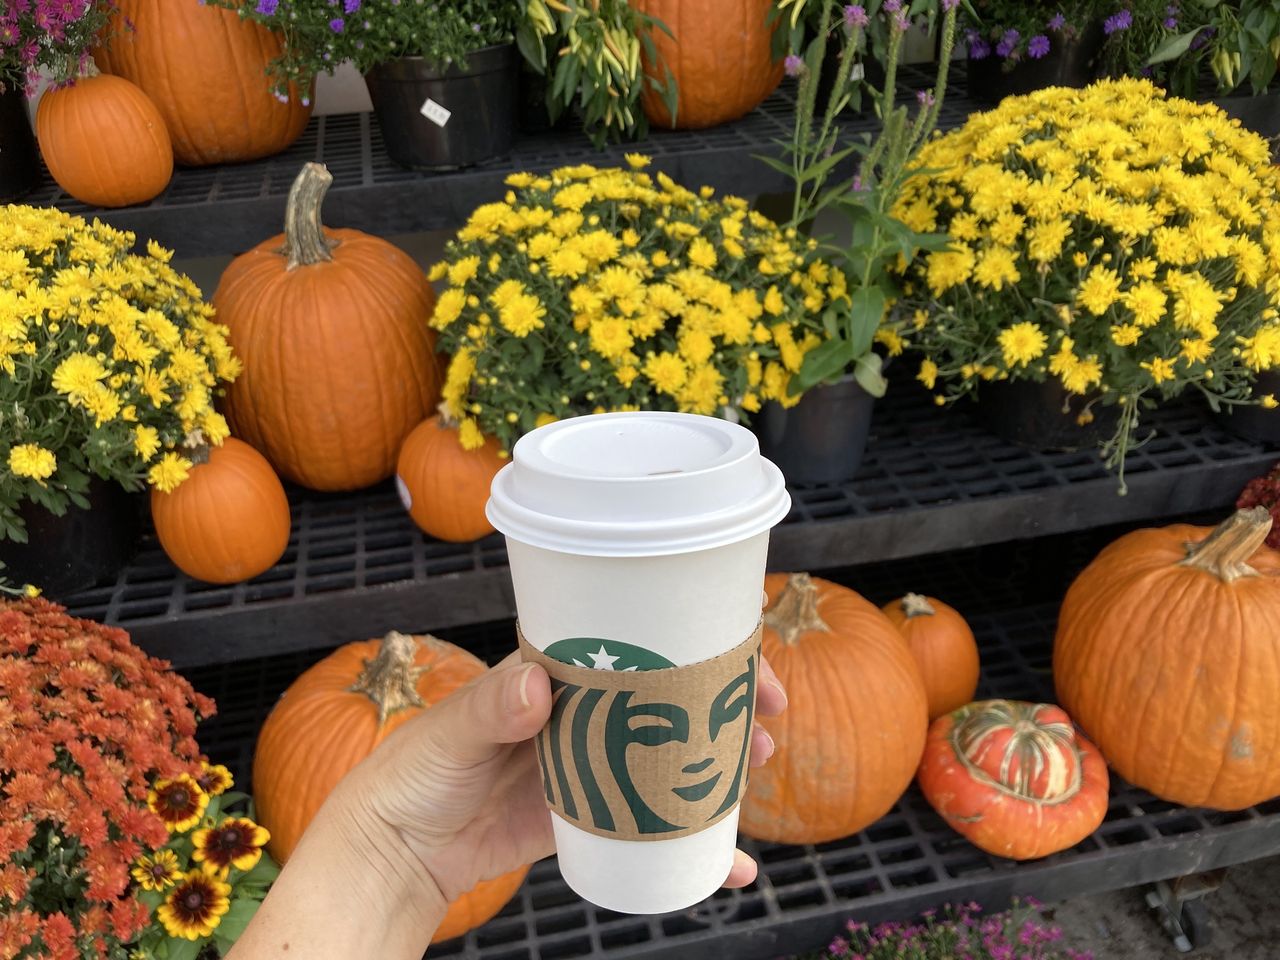 Pumpkin spice latte, purchased at a Starbucks